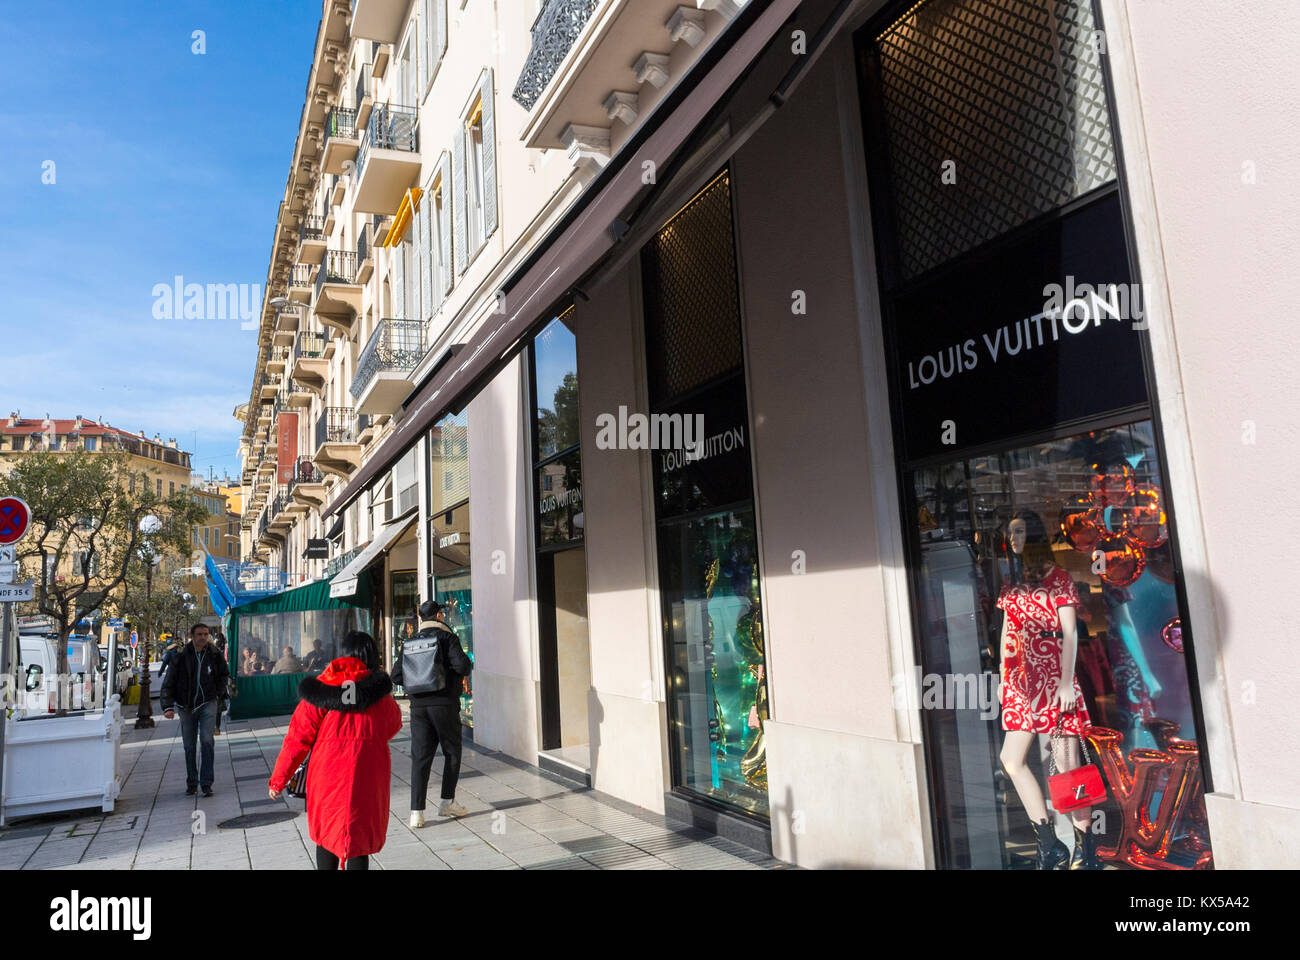 Louis Vuitton store in Munich, Germany Stock Photo - Alamy